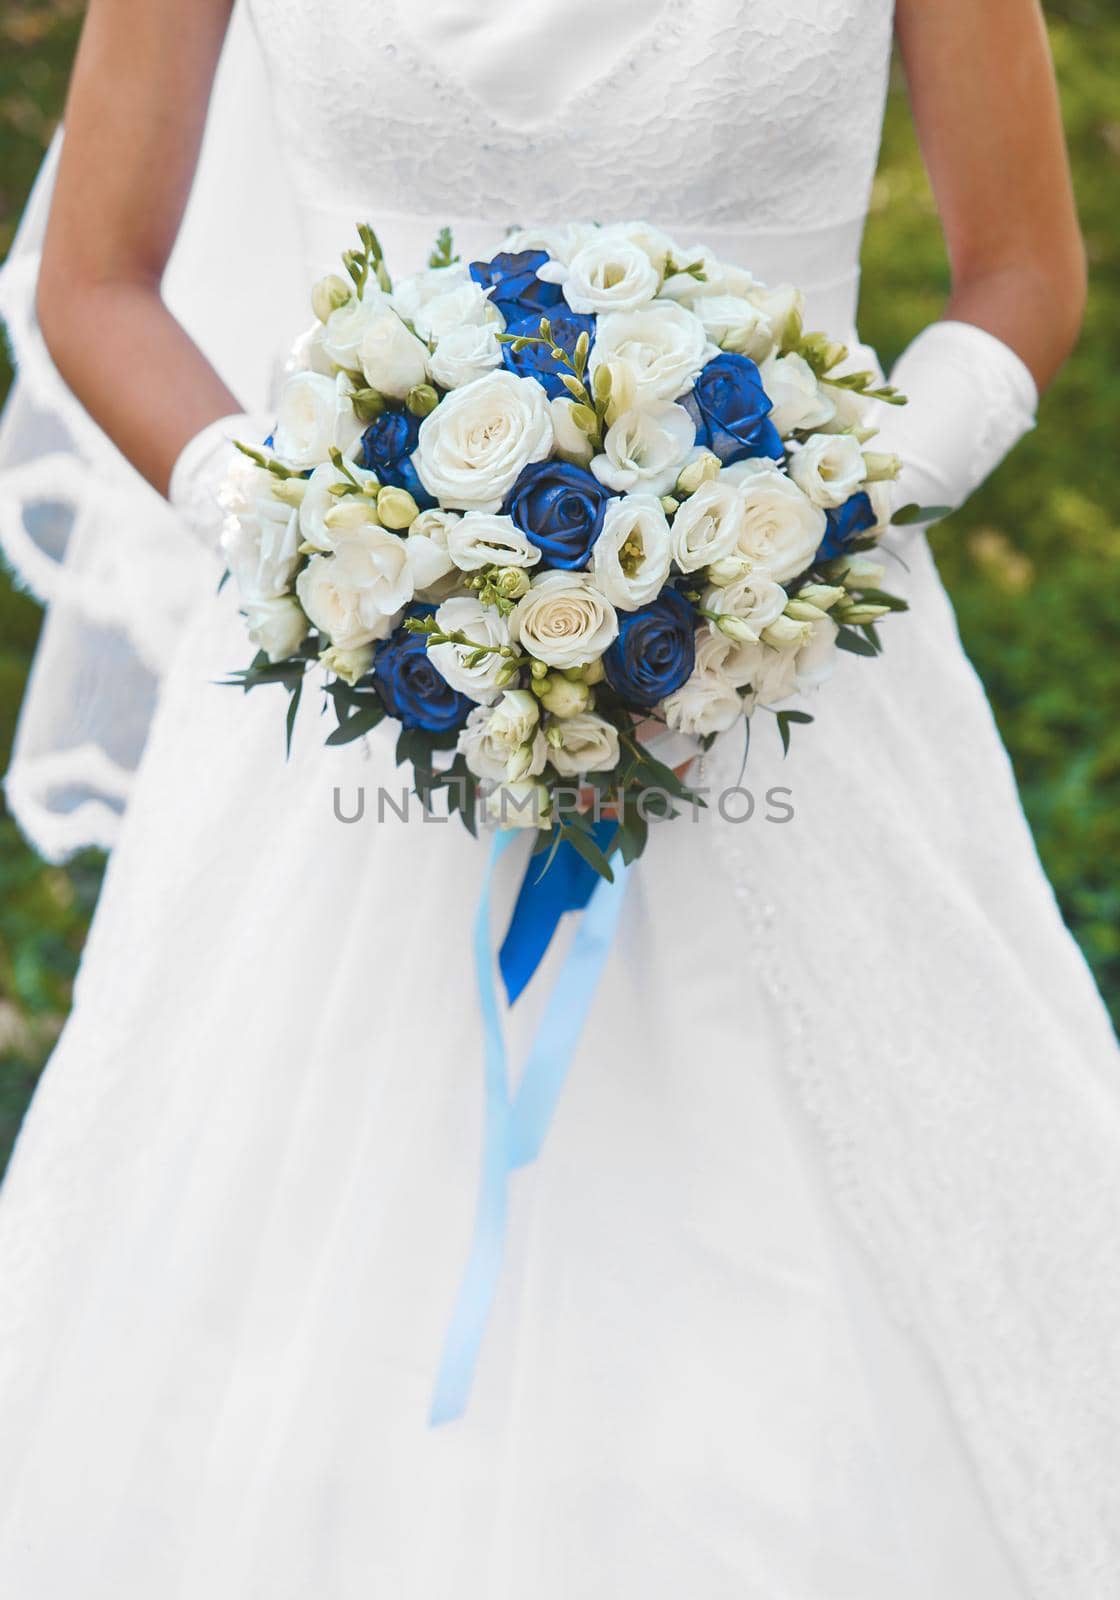 Bride in white wedding dress holds a bouquet of flowers white and blue roses close up by AYDO8